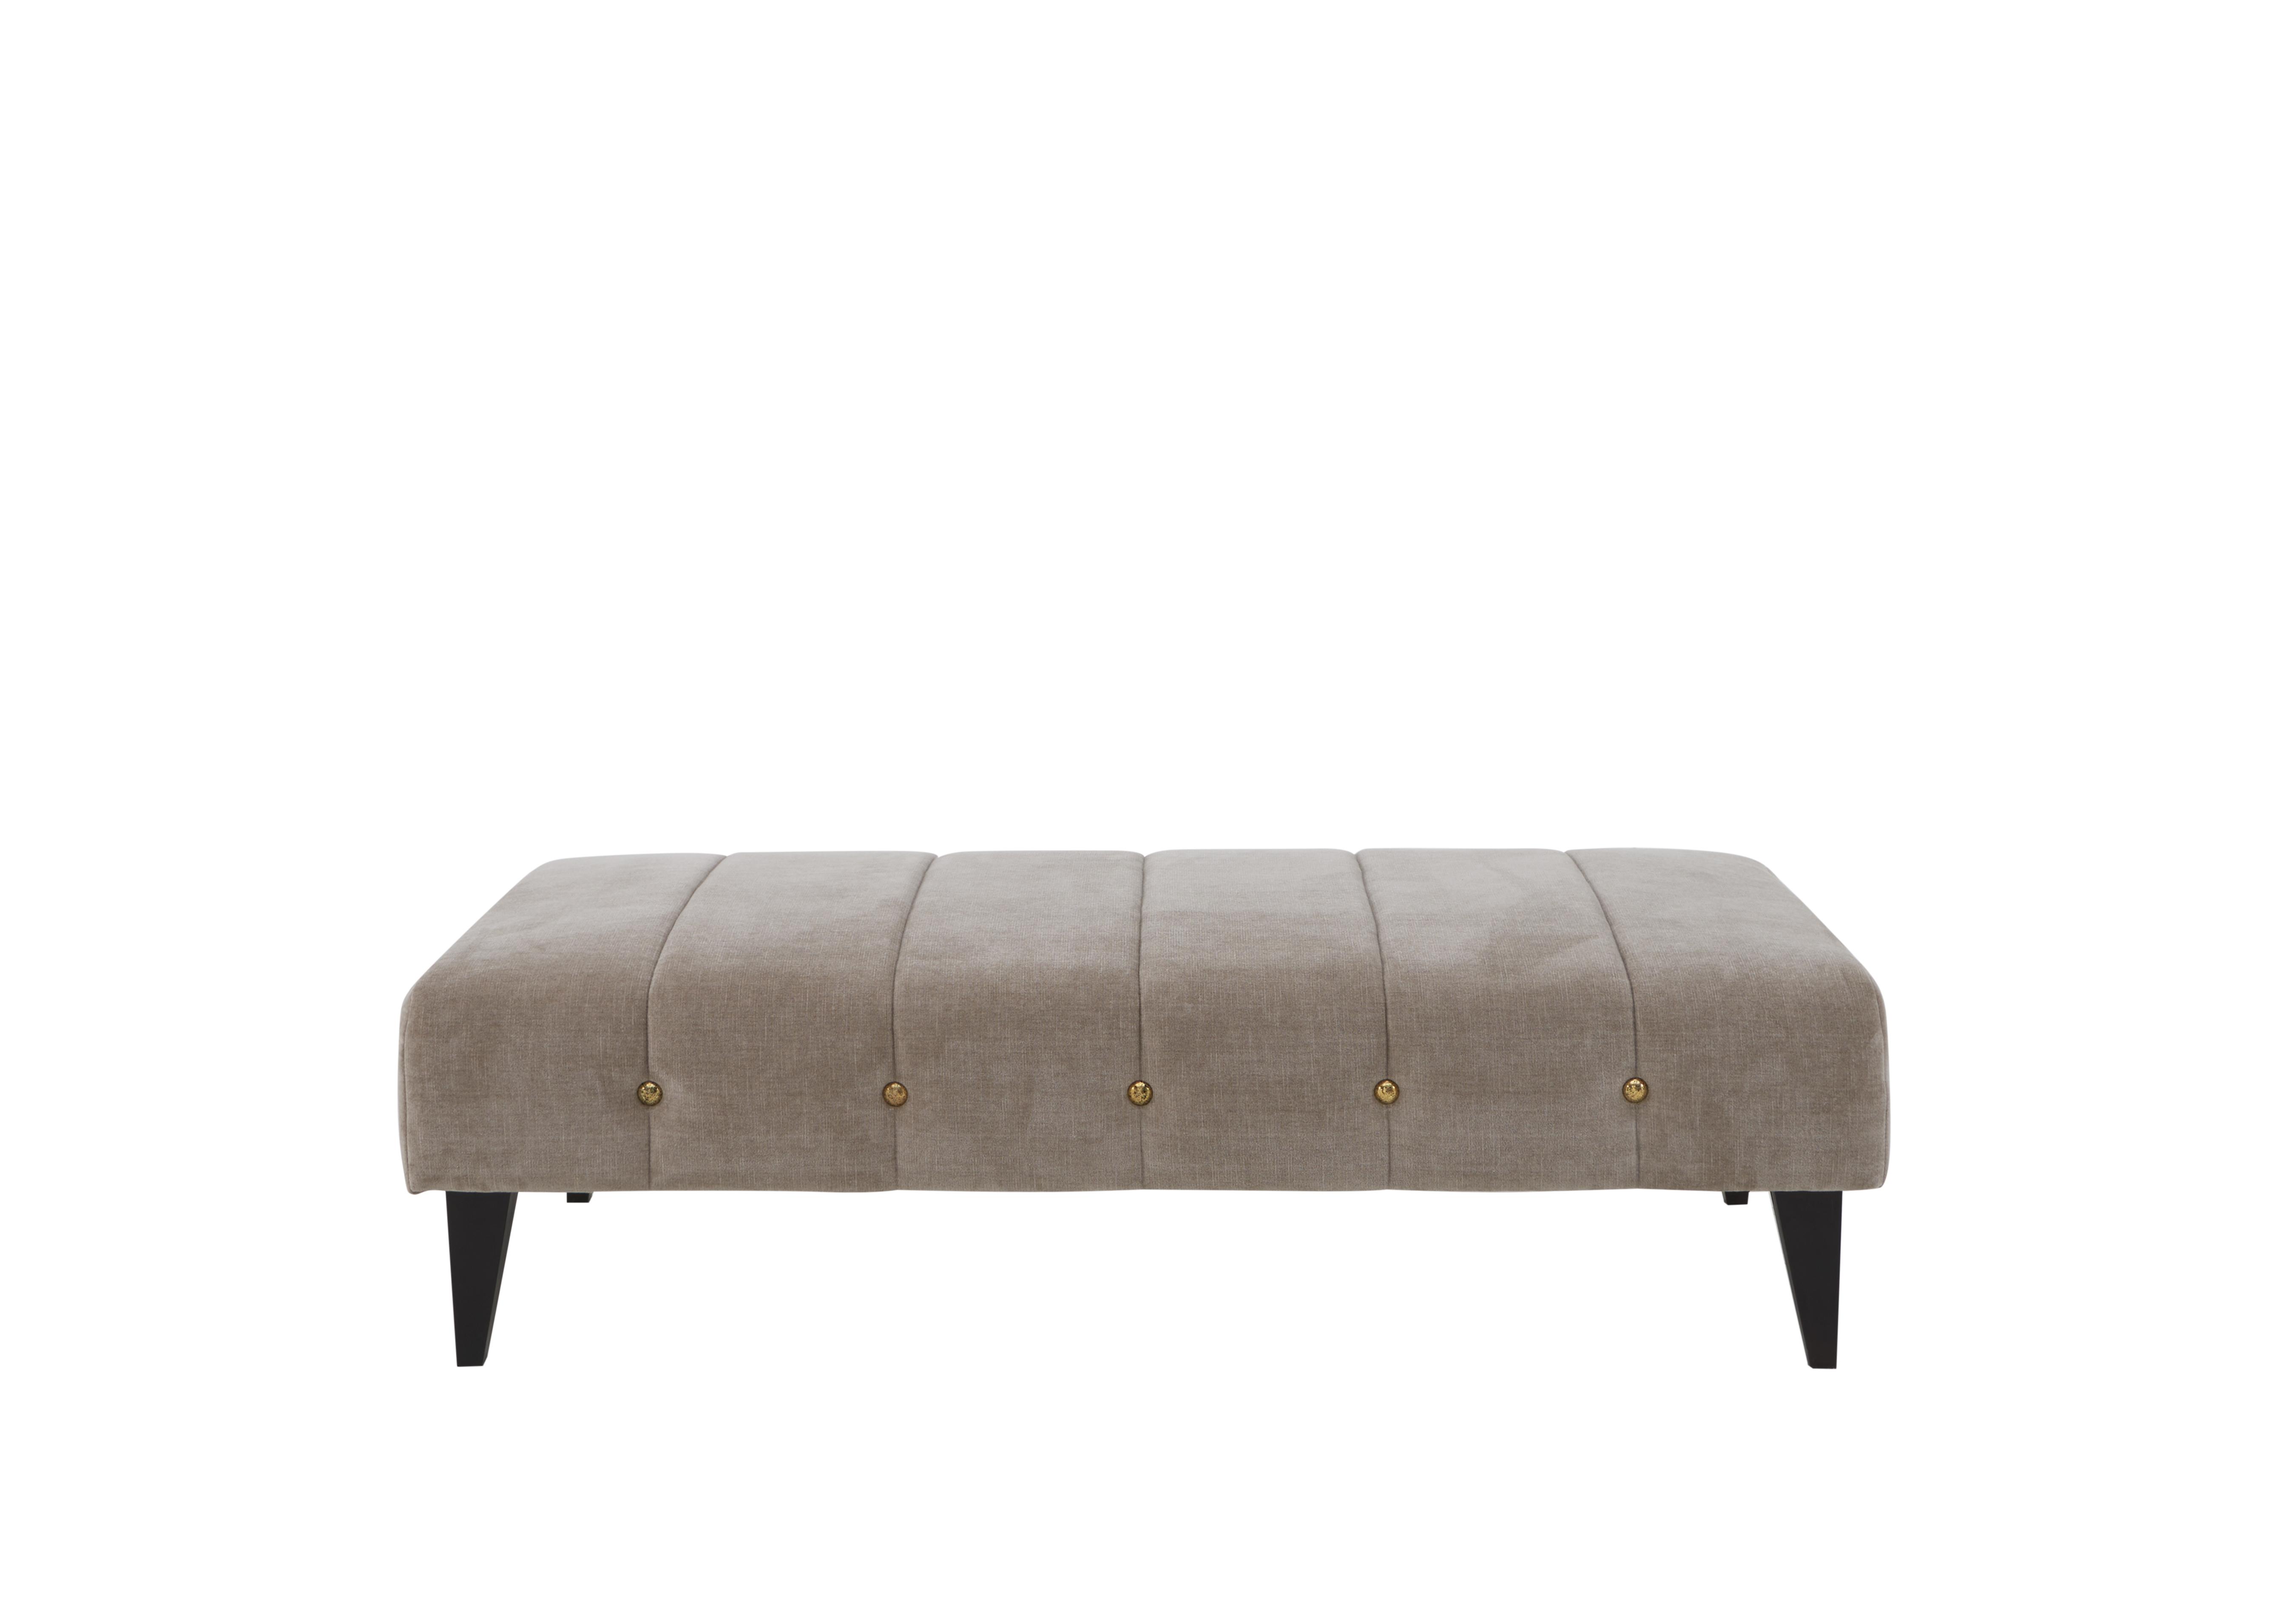 PRODZFRSP000000000045280 Alexander And James Sumptuous Fabric Bench Footstool Chamonix Wicker Dkgold?$large$